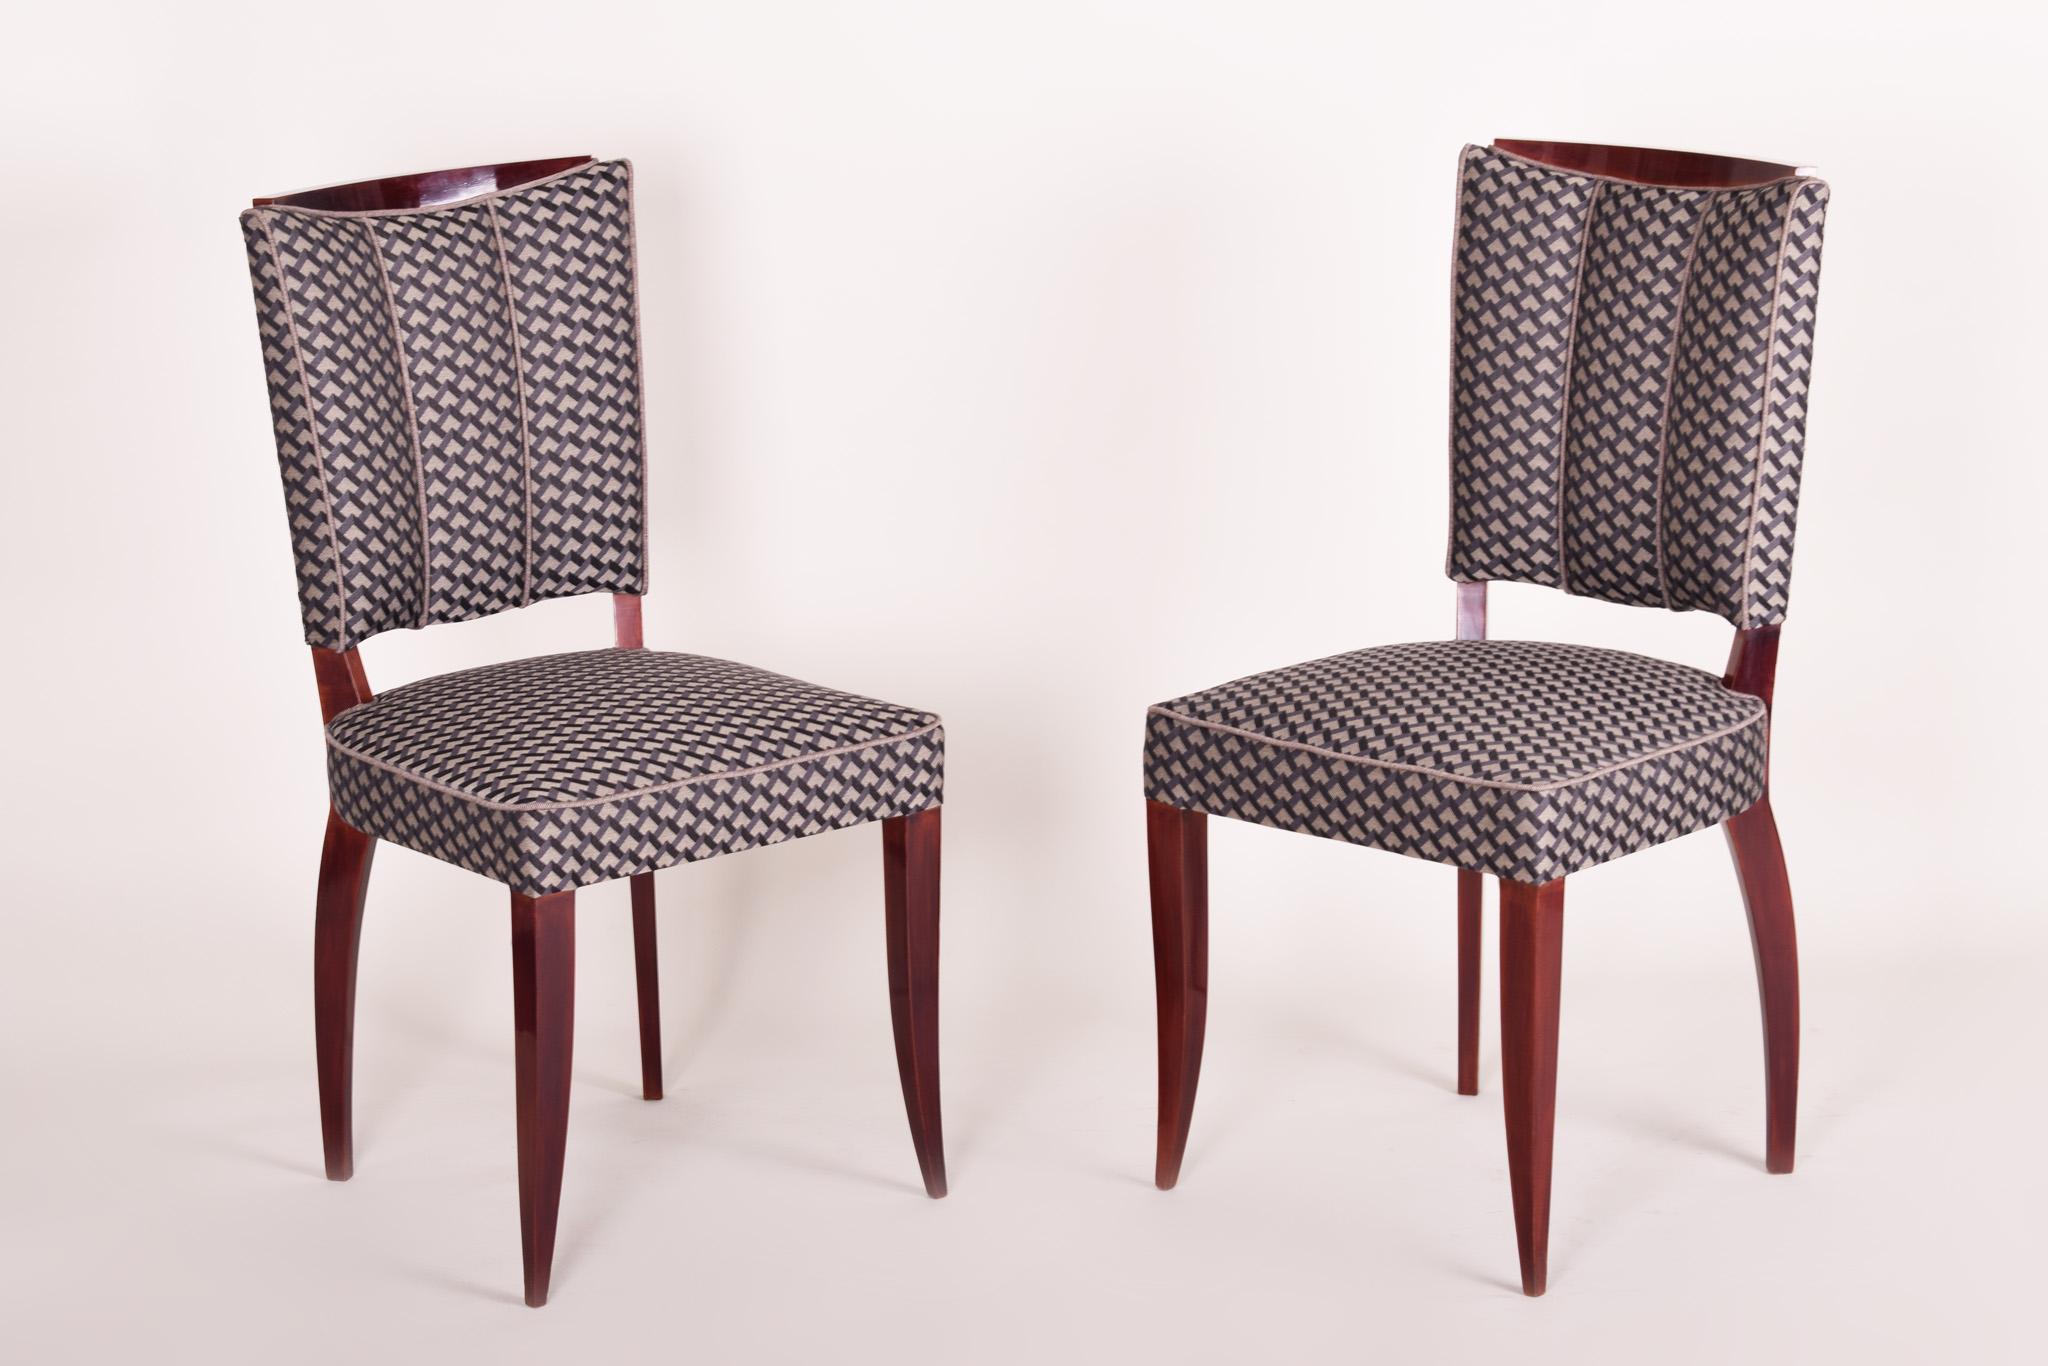 Early 20th Century Restored French Art Deco Chairs, Six Pieces, Designed by Jules Leleu, 1920-1929